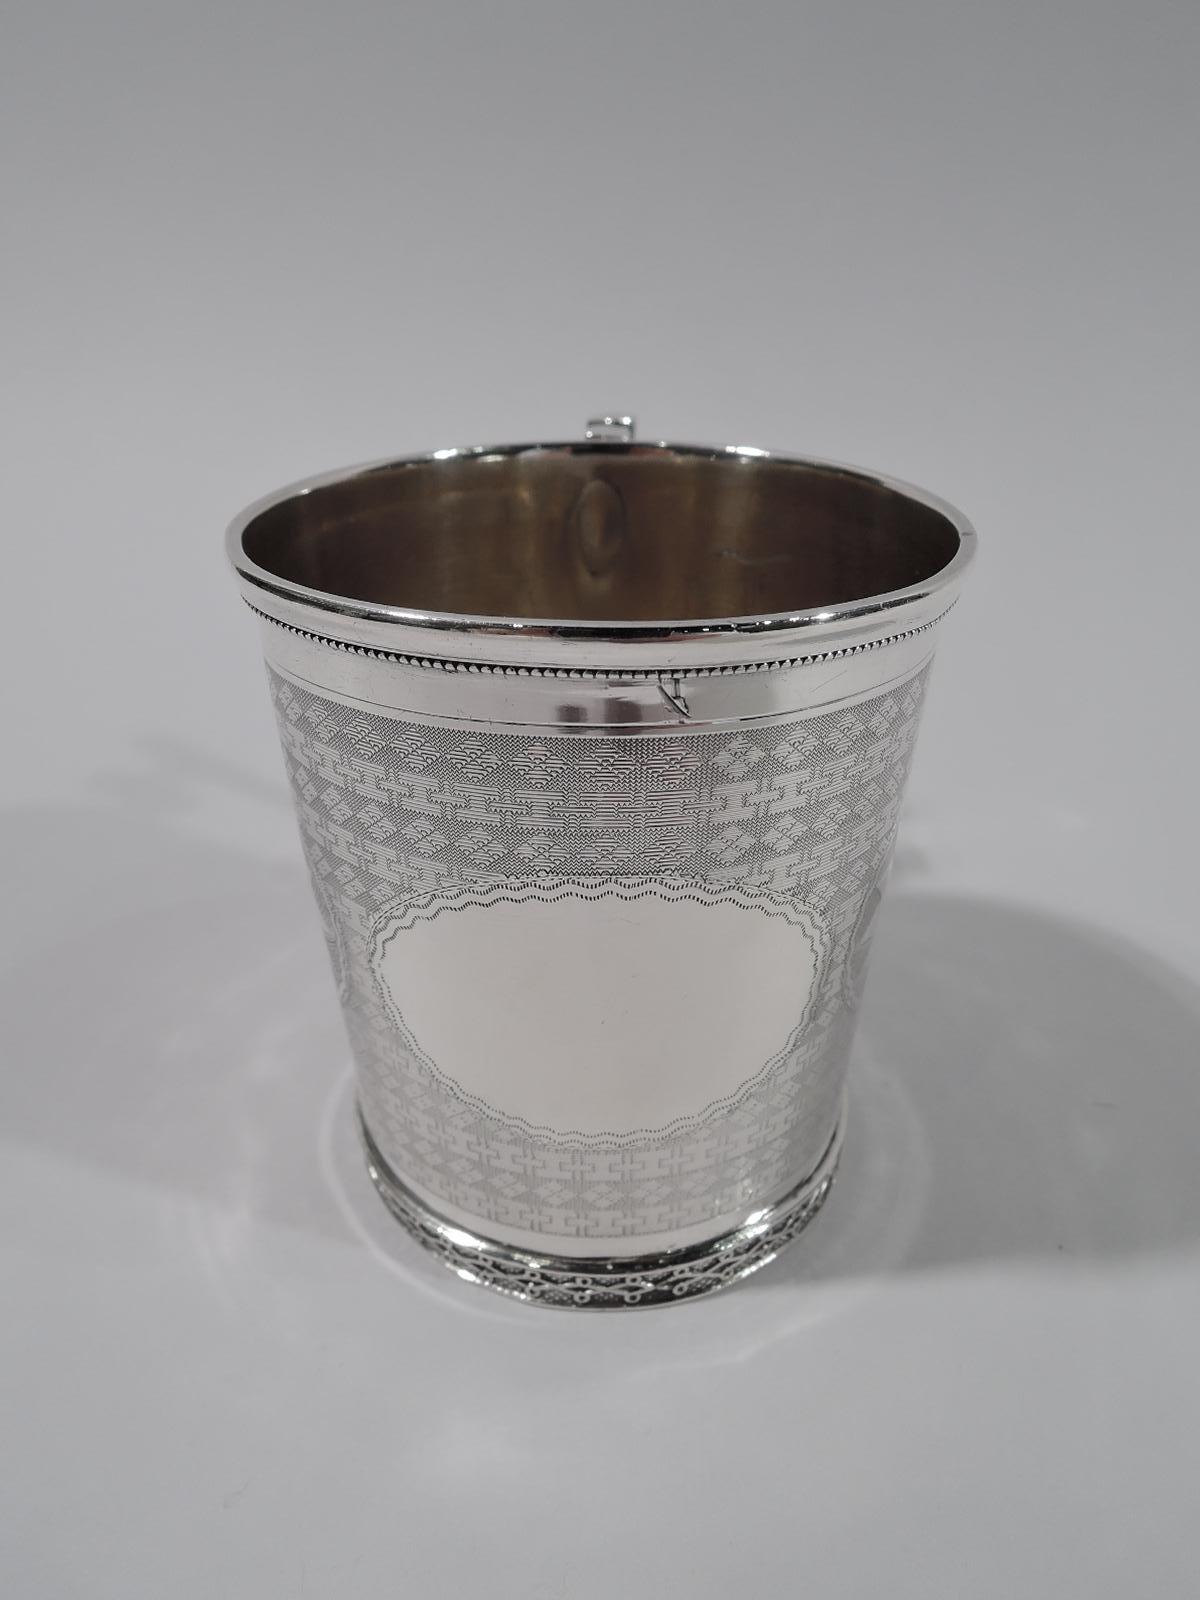 Aesthetic classical coin silver baby cup. Straight sides with bracket handle. Oval frames with wavy borders of which one vacant and two inset with paterae. Engine-turned geometric-patterned ground. A stunner. Marked “Coin / 2” with maker’s stamp for